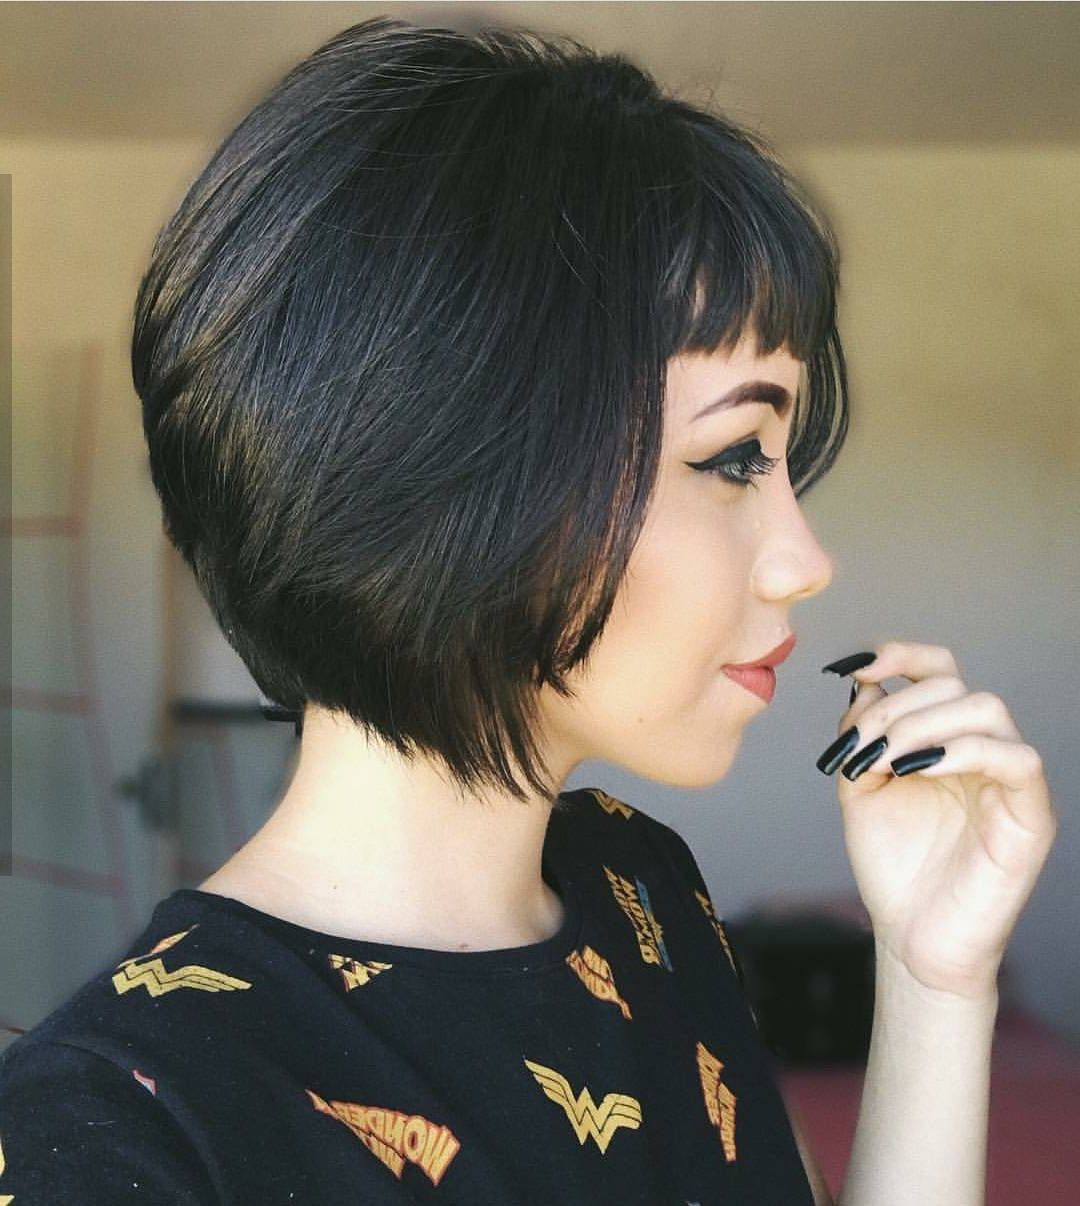 10 Chic Short Bob Haircuts That Balance Your Face Shape! – Short Intended For Short Haircuts For Asian Girl (View 23 of 25)